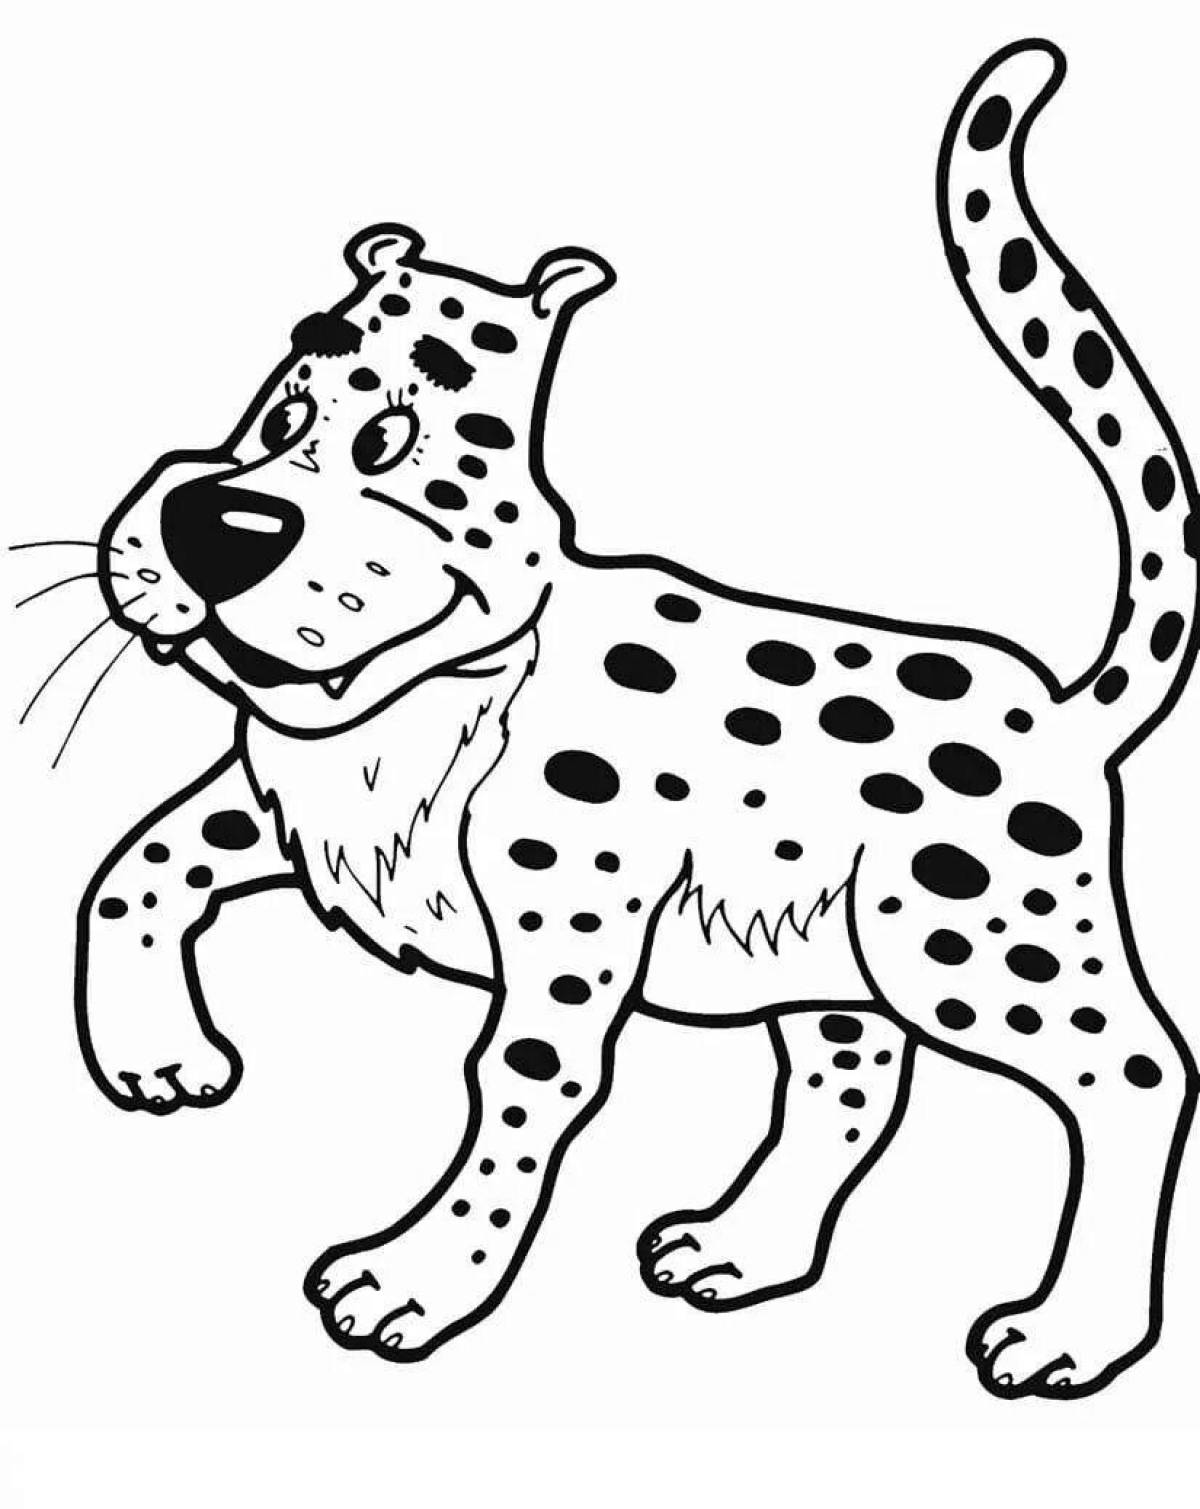 Colourful leopard cat coloring page